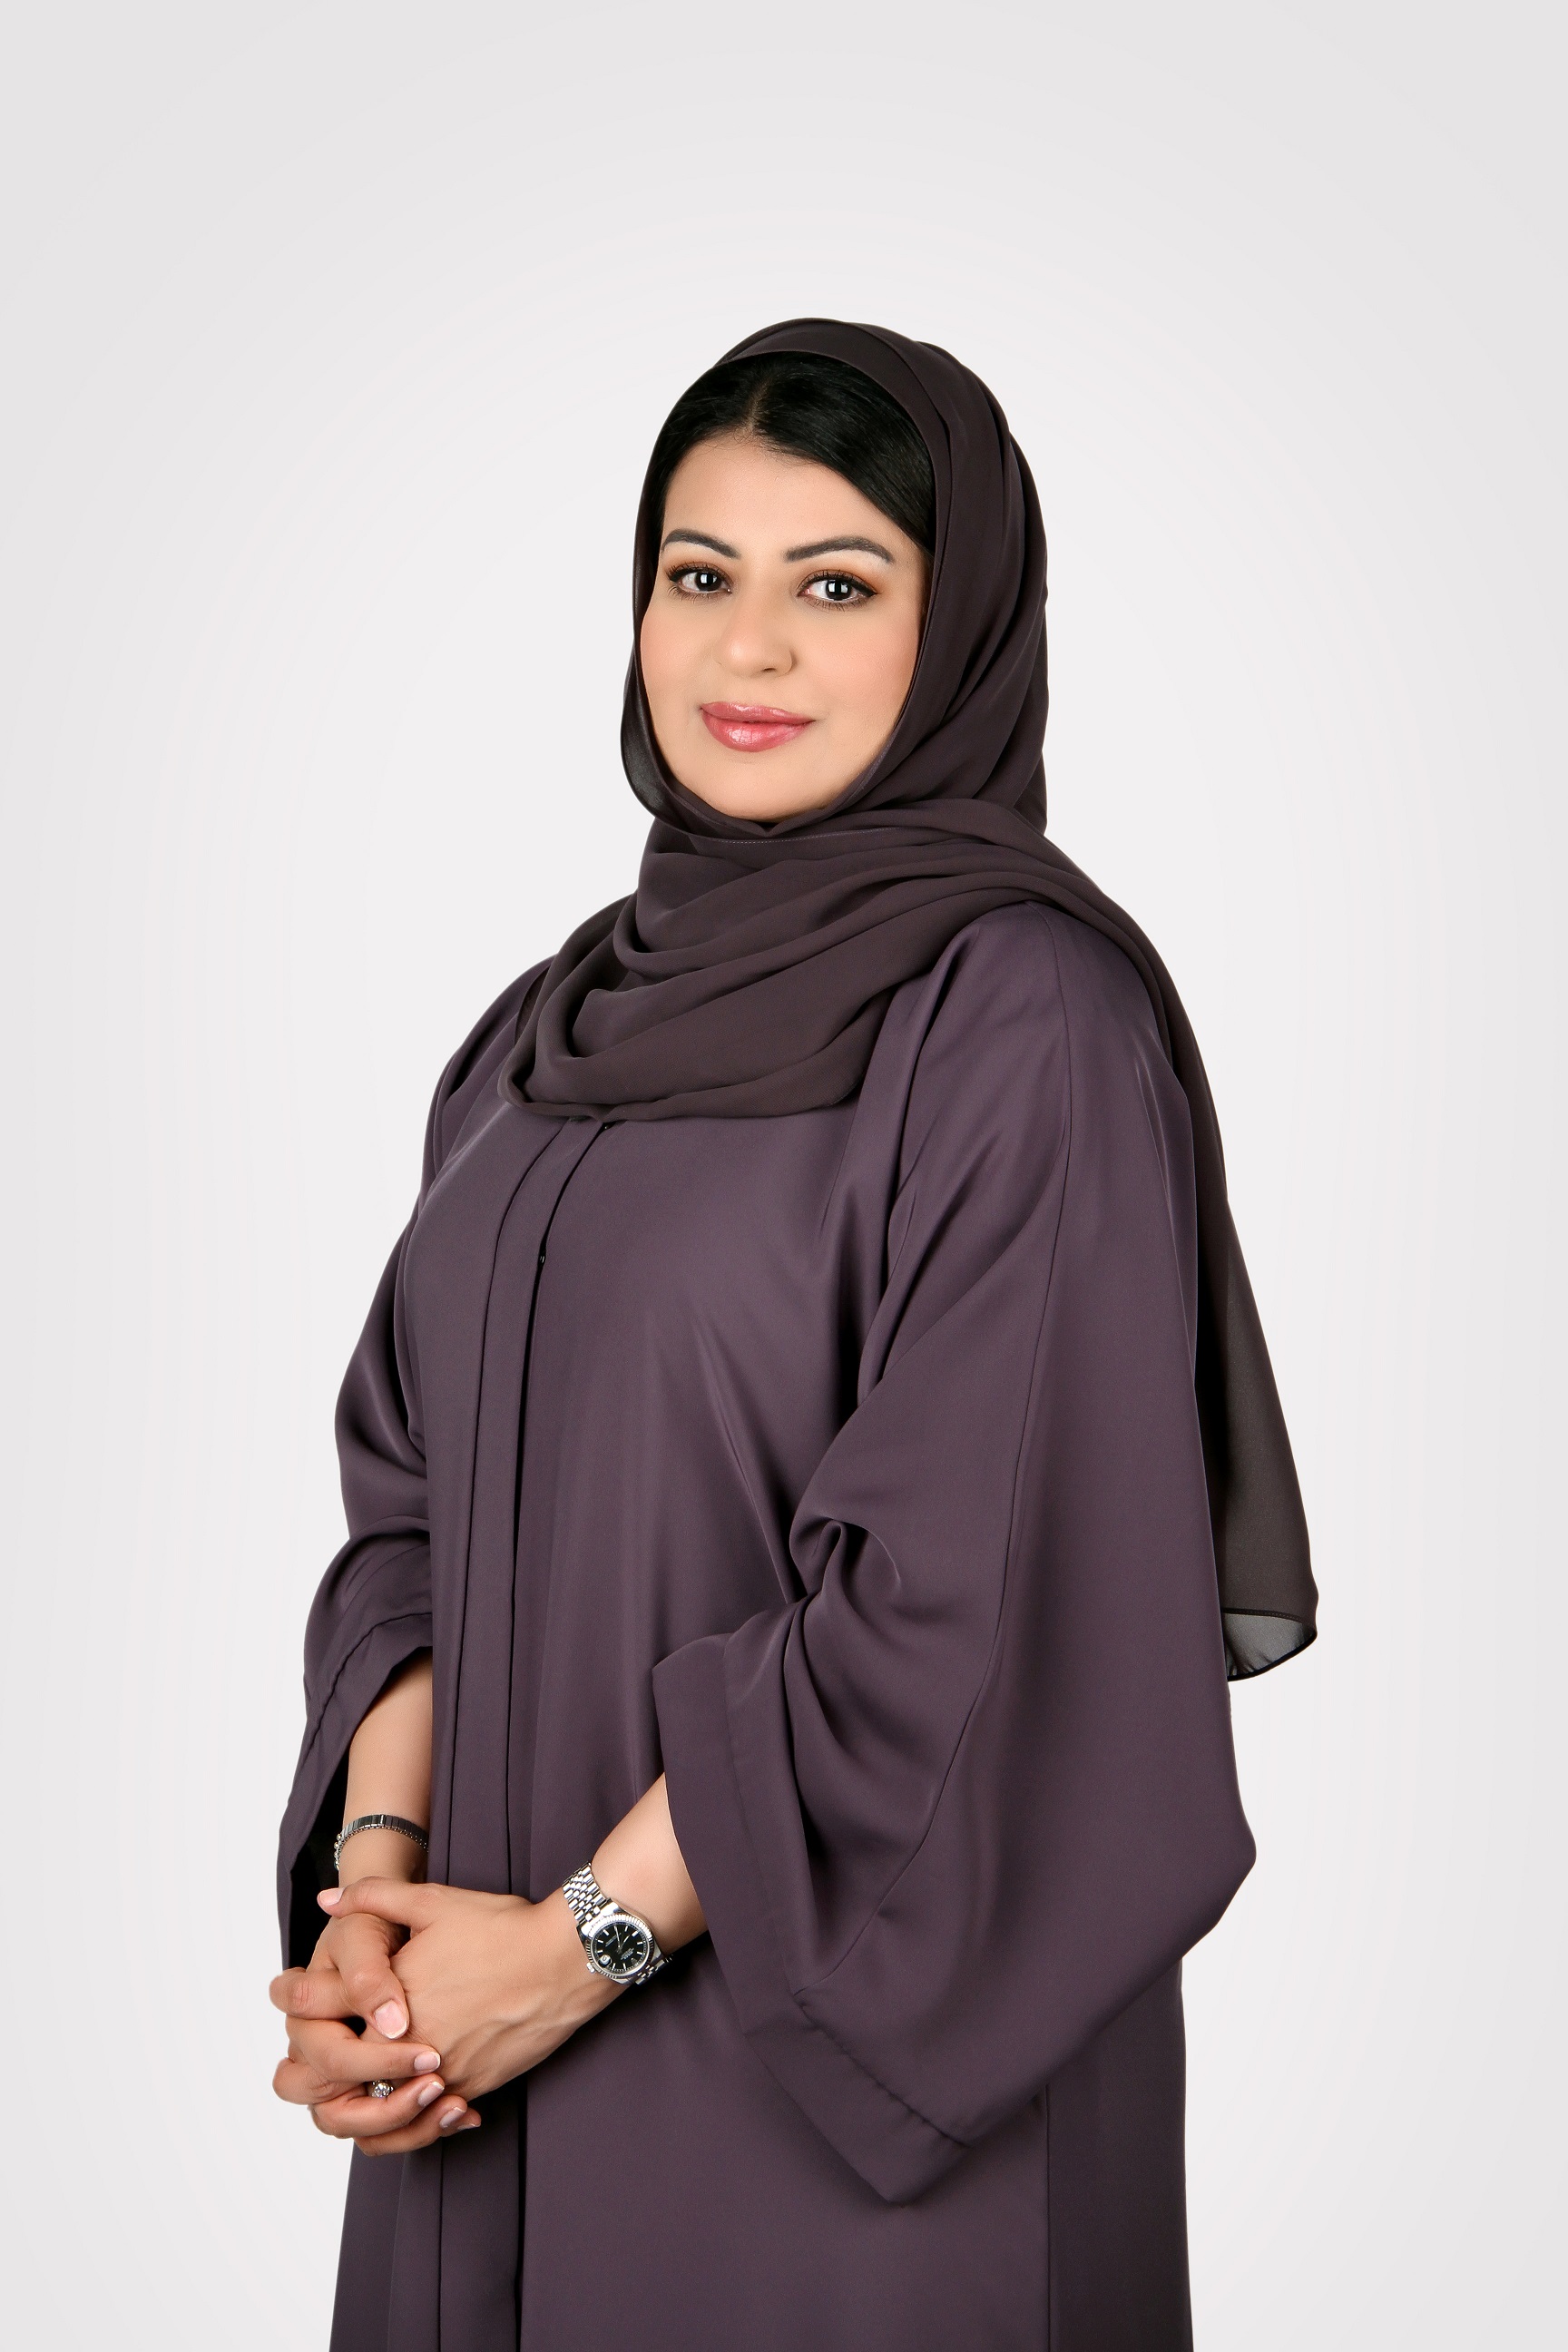 Bank Nizwa marks Omani Women's Day with attractive Credit Card Offers OR  Celebrate Omani Women's Day with Bank Nizwa's limited period Credit Card  Offers